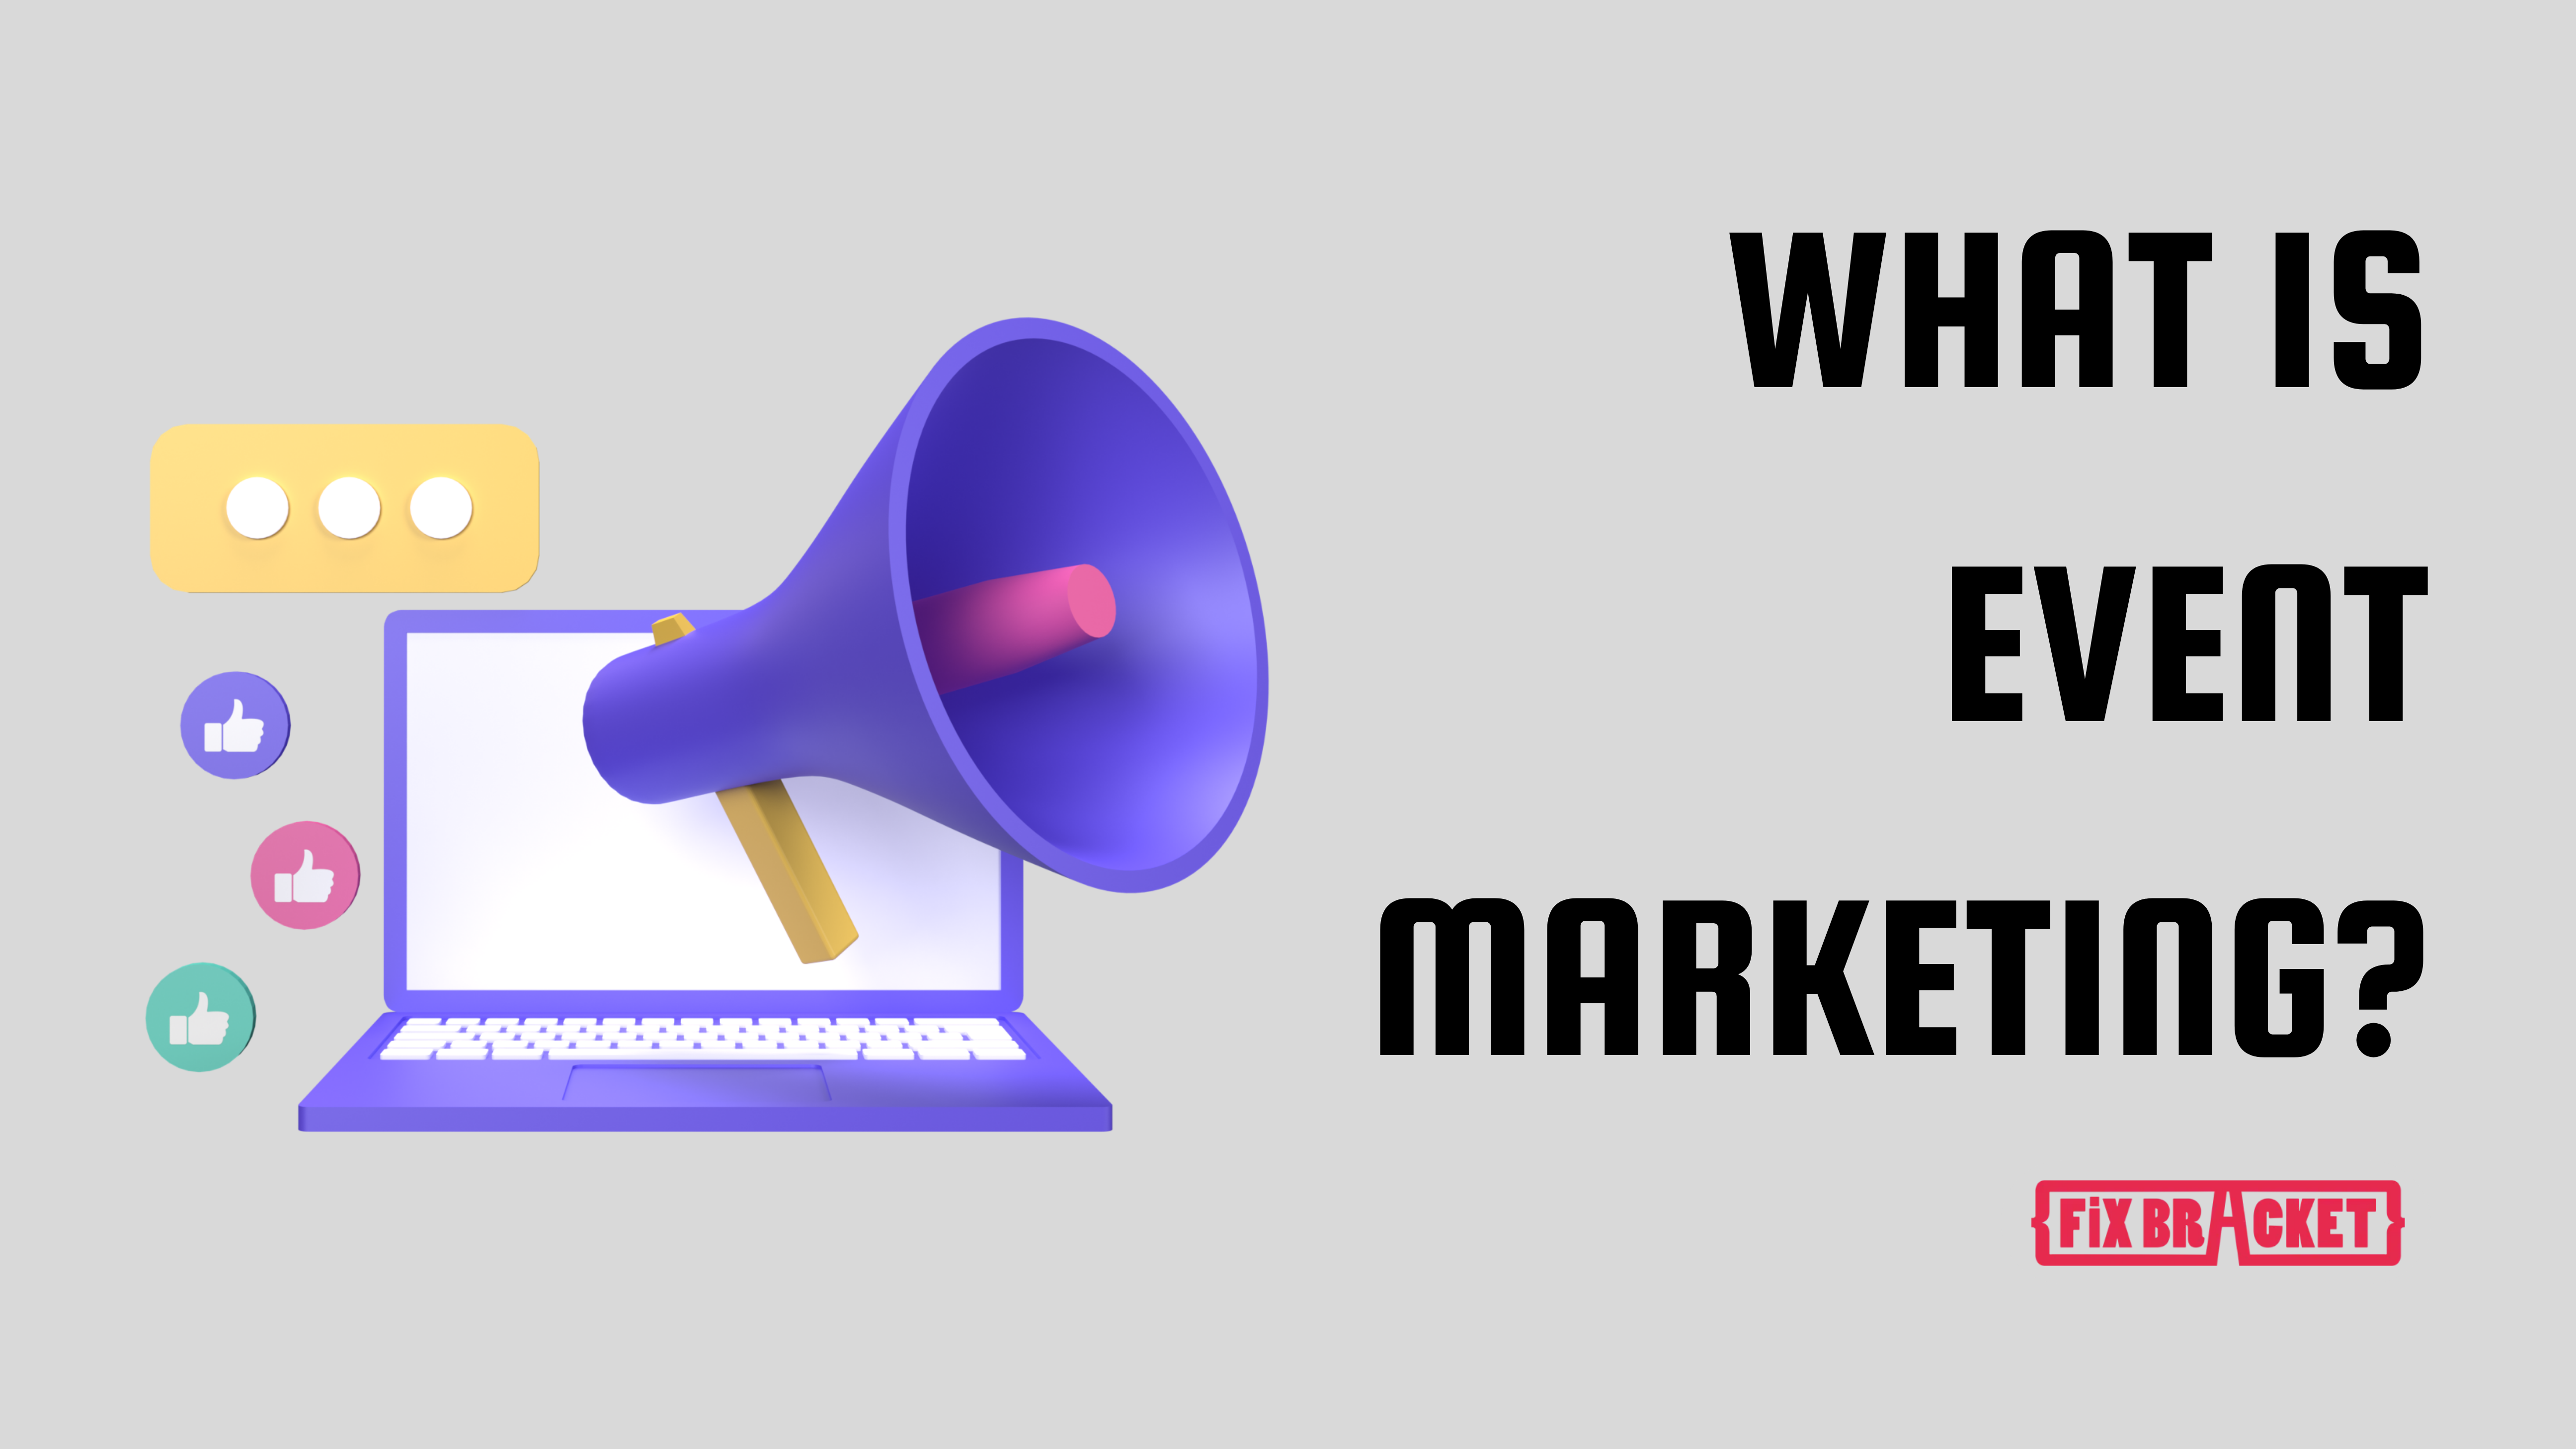 What Is Event Marketing?